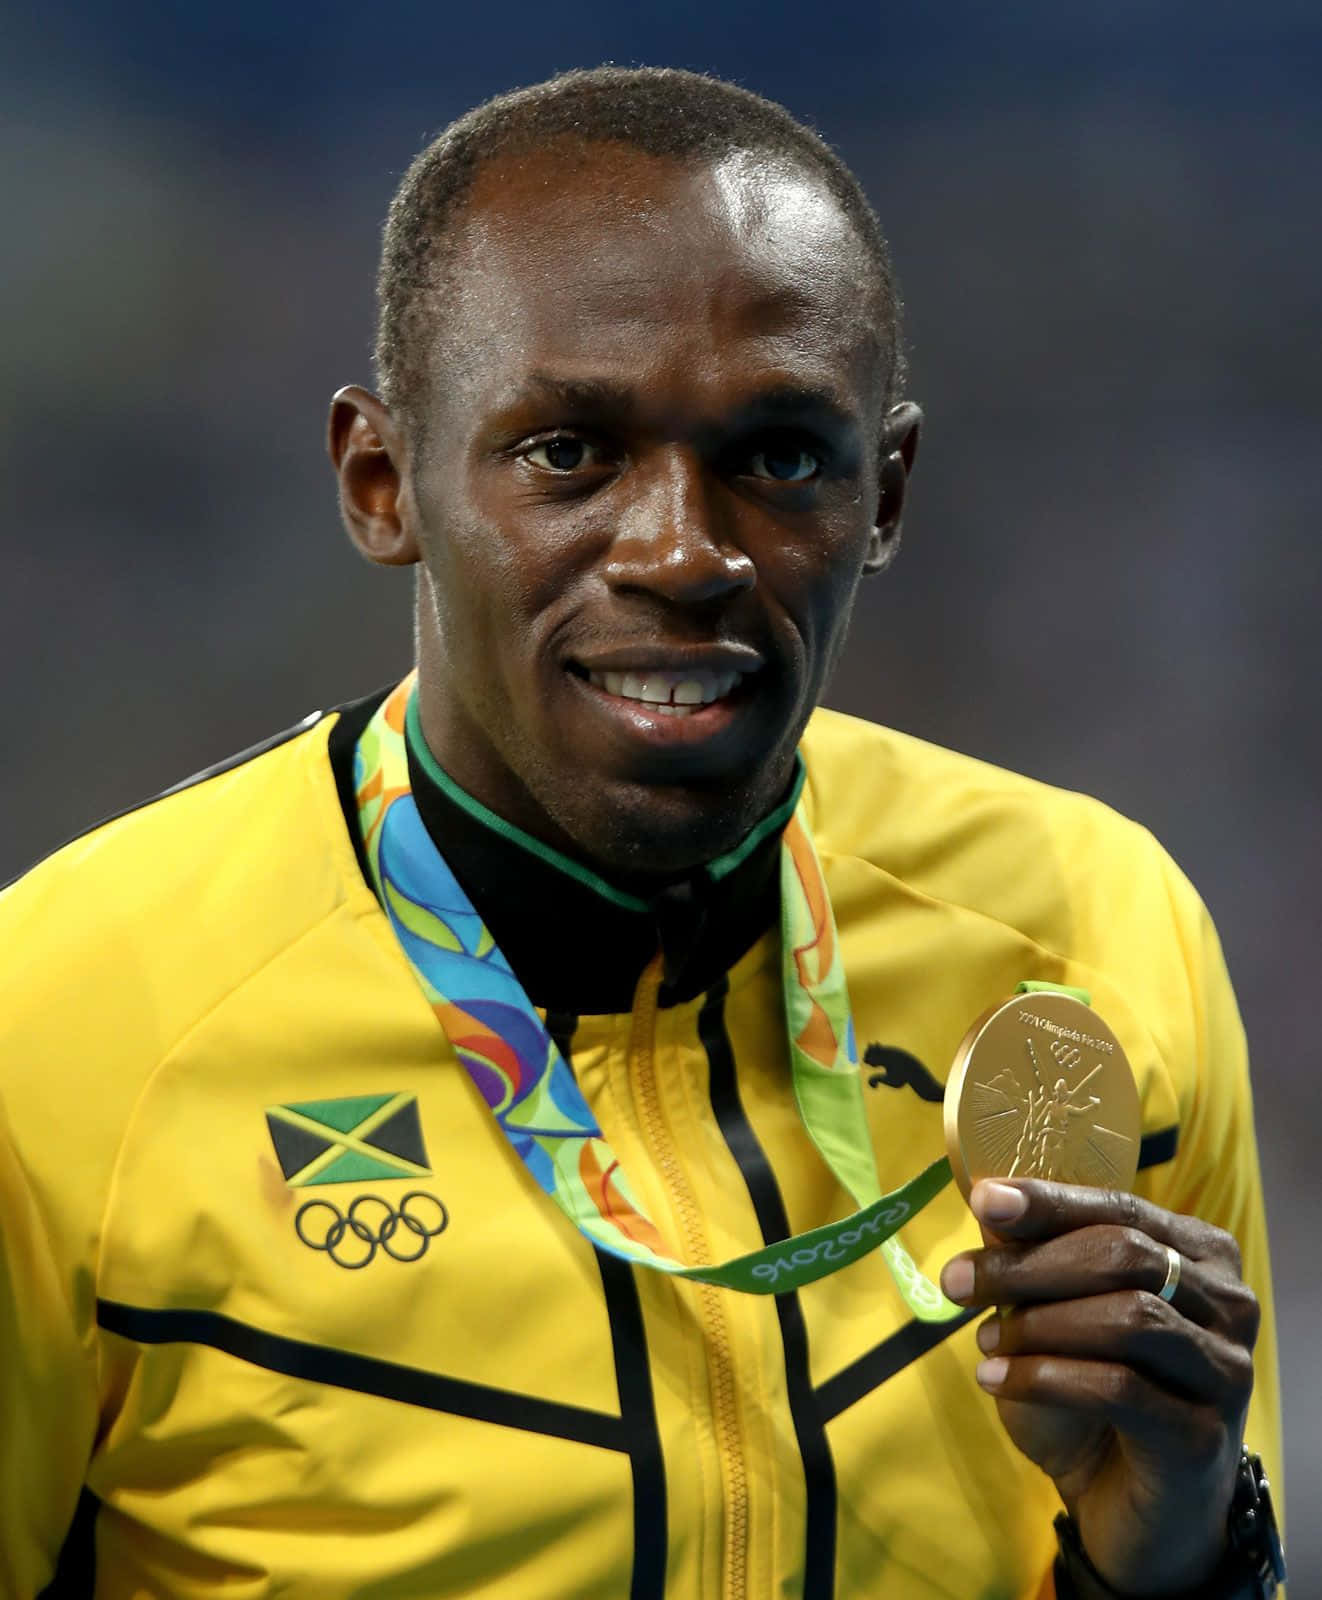 Usainbolt Ler Med Sin Medalj. (this Can Be Used As A Description Of A Computer Or Mobile Wallpaper Featuring An Image Of Usain Bolt Smiling With His Medal.) Wallpaper